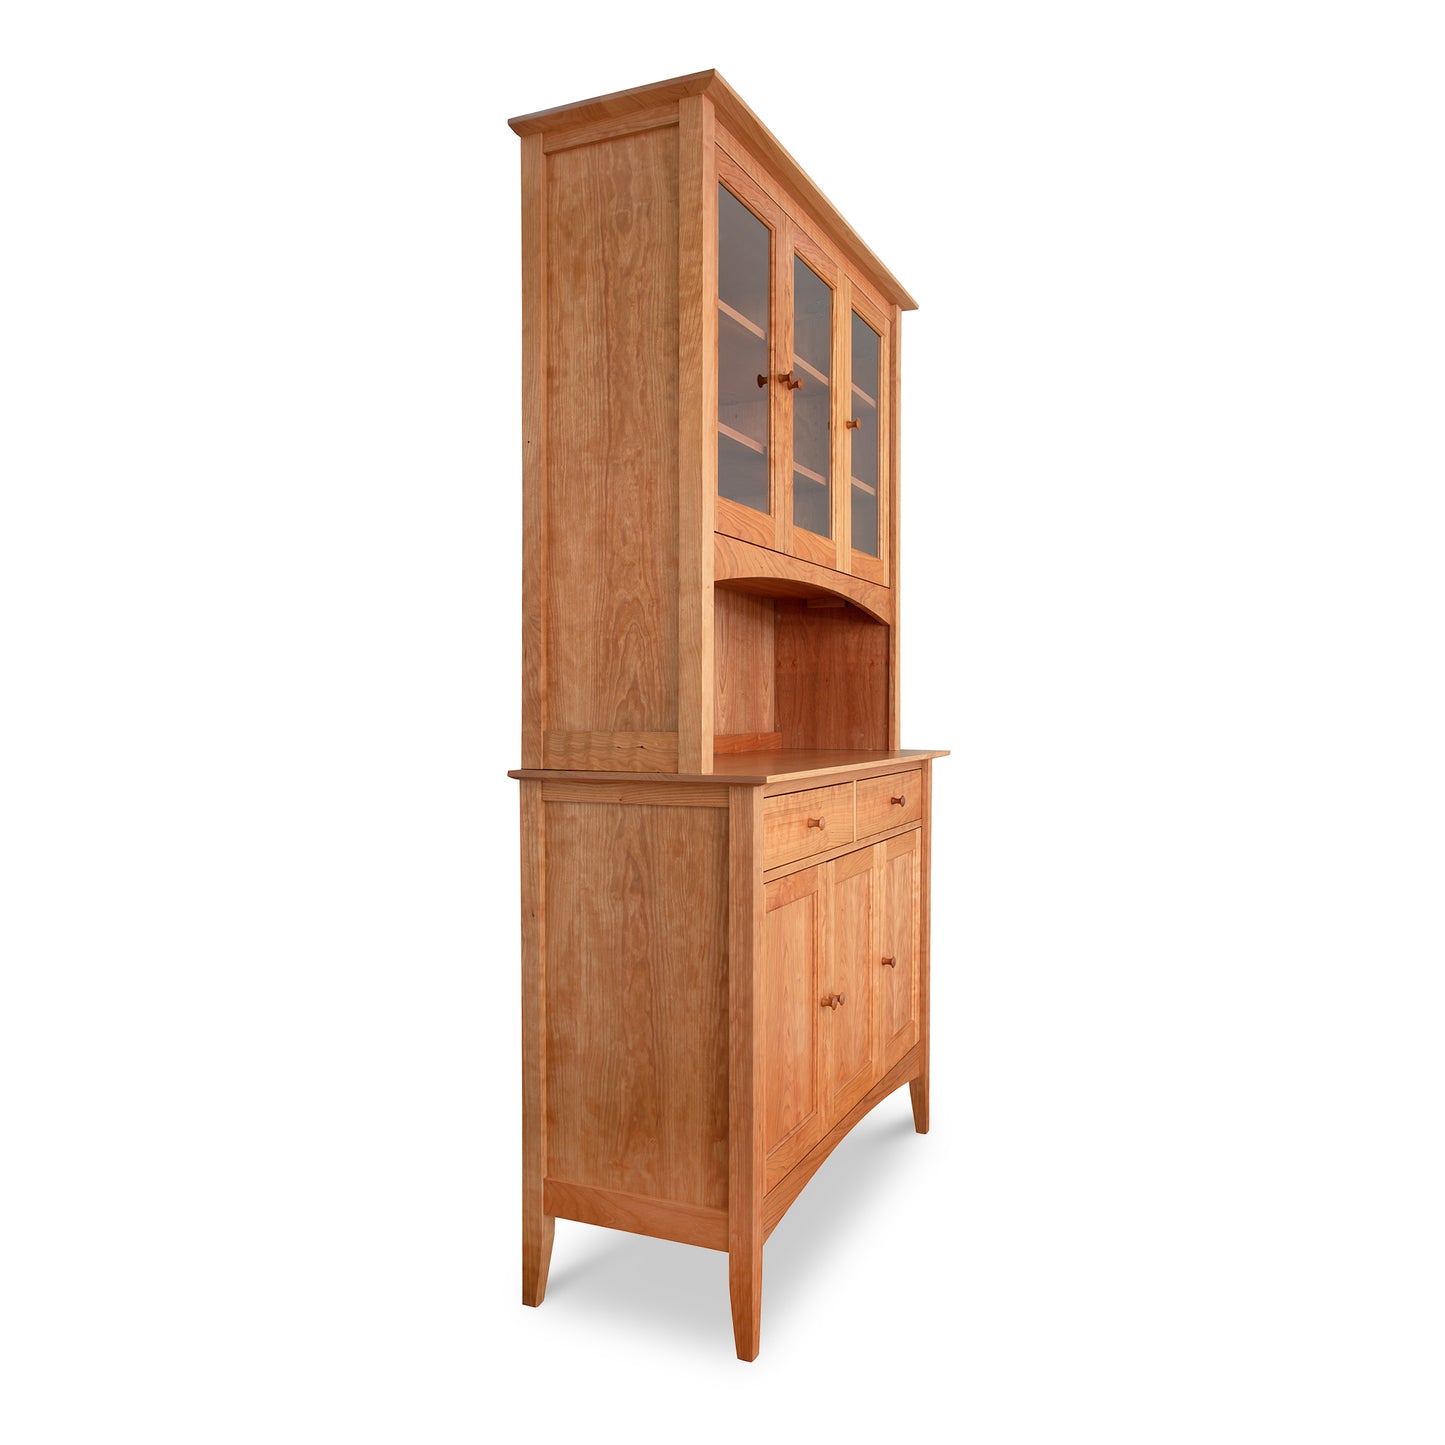 American Shaker 50" China Cabinet by Maple Corner Woodworks with upper glass doors and lower solid doors, featuring adjustable shelves against a white background.